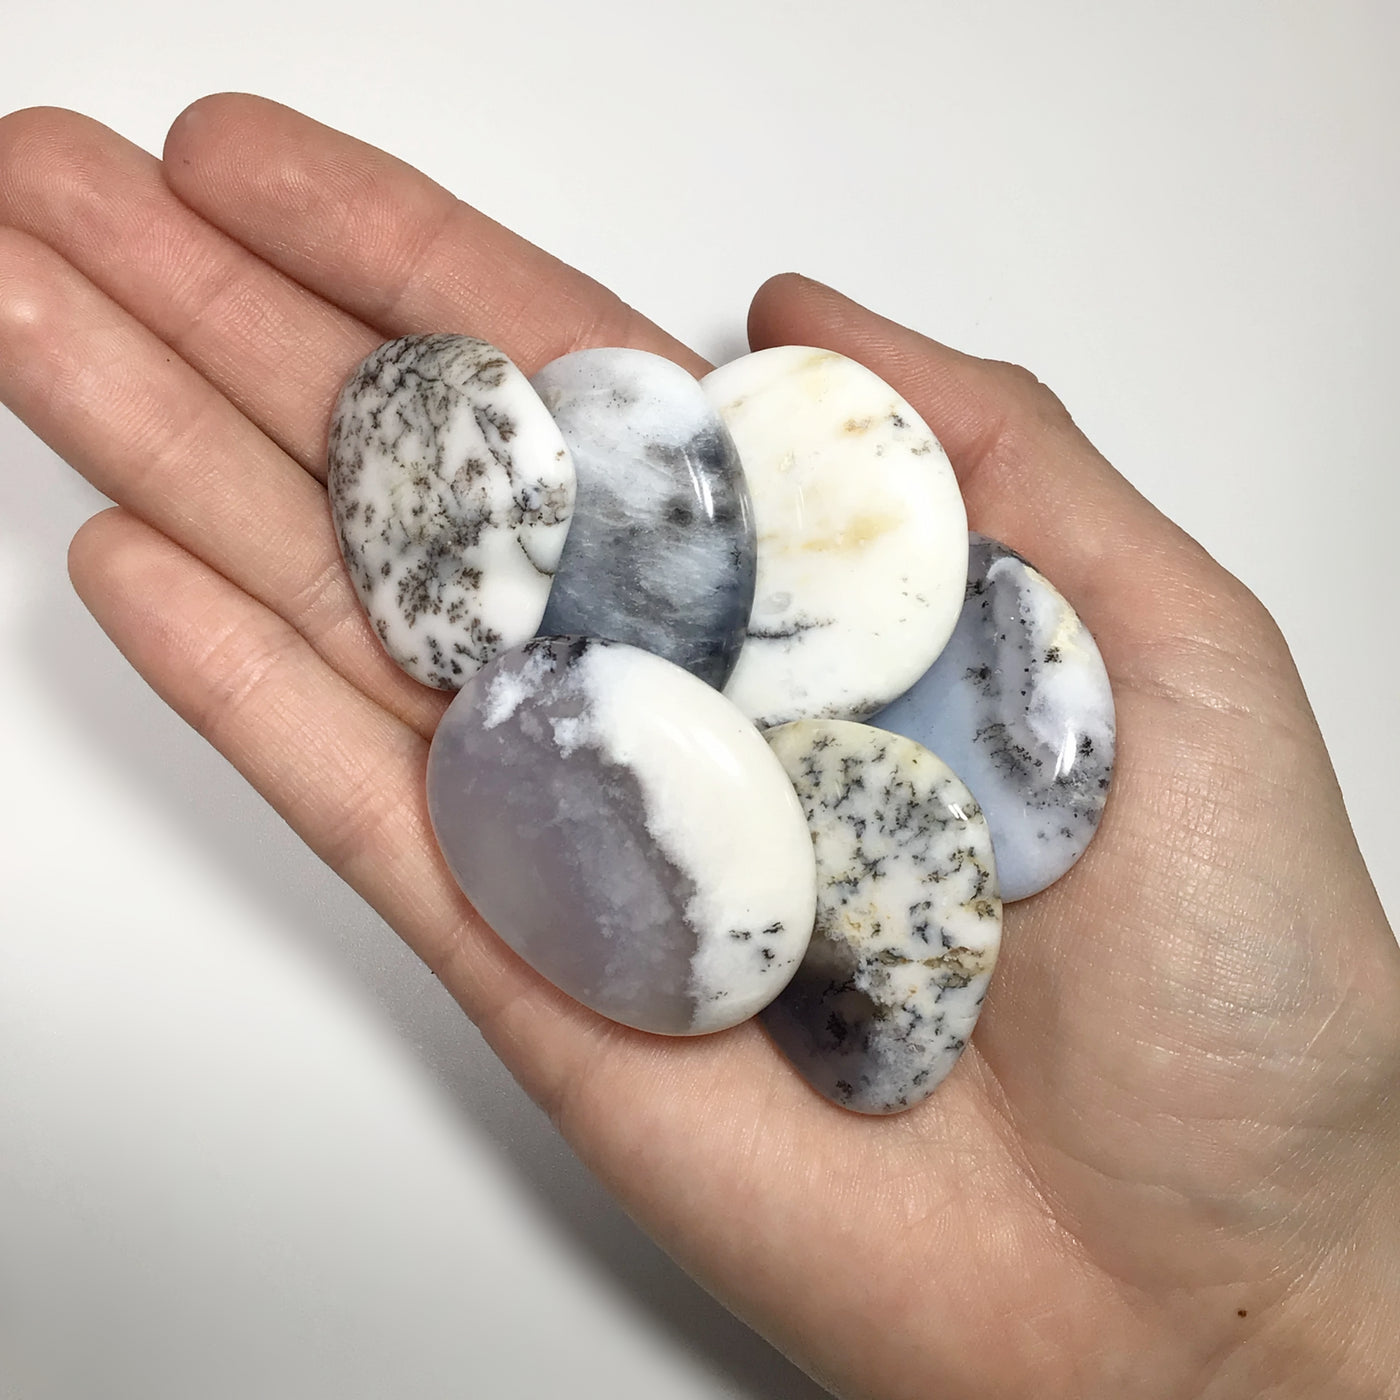 Dendritic Opal Touch Stone at $39 Each